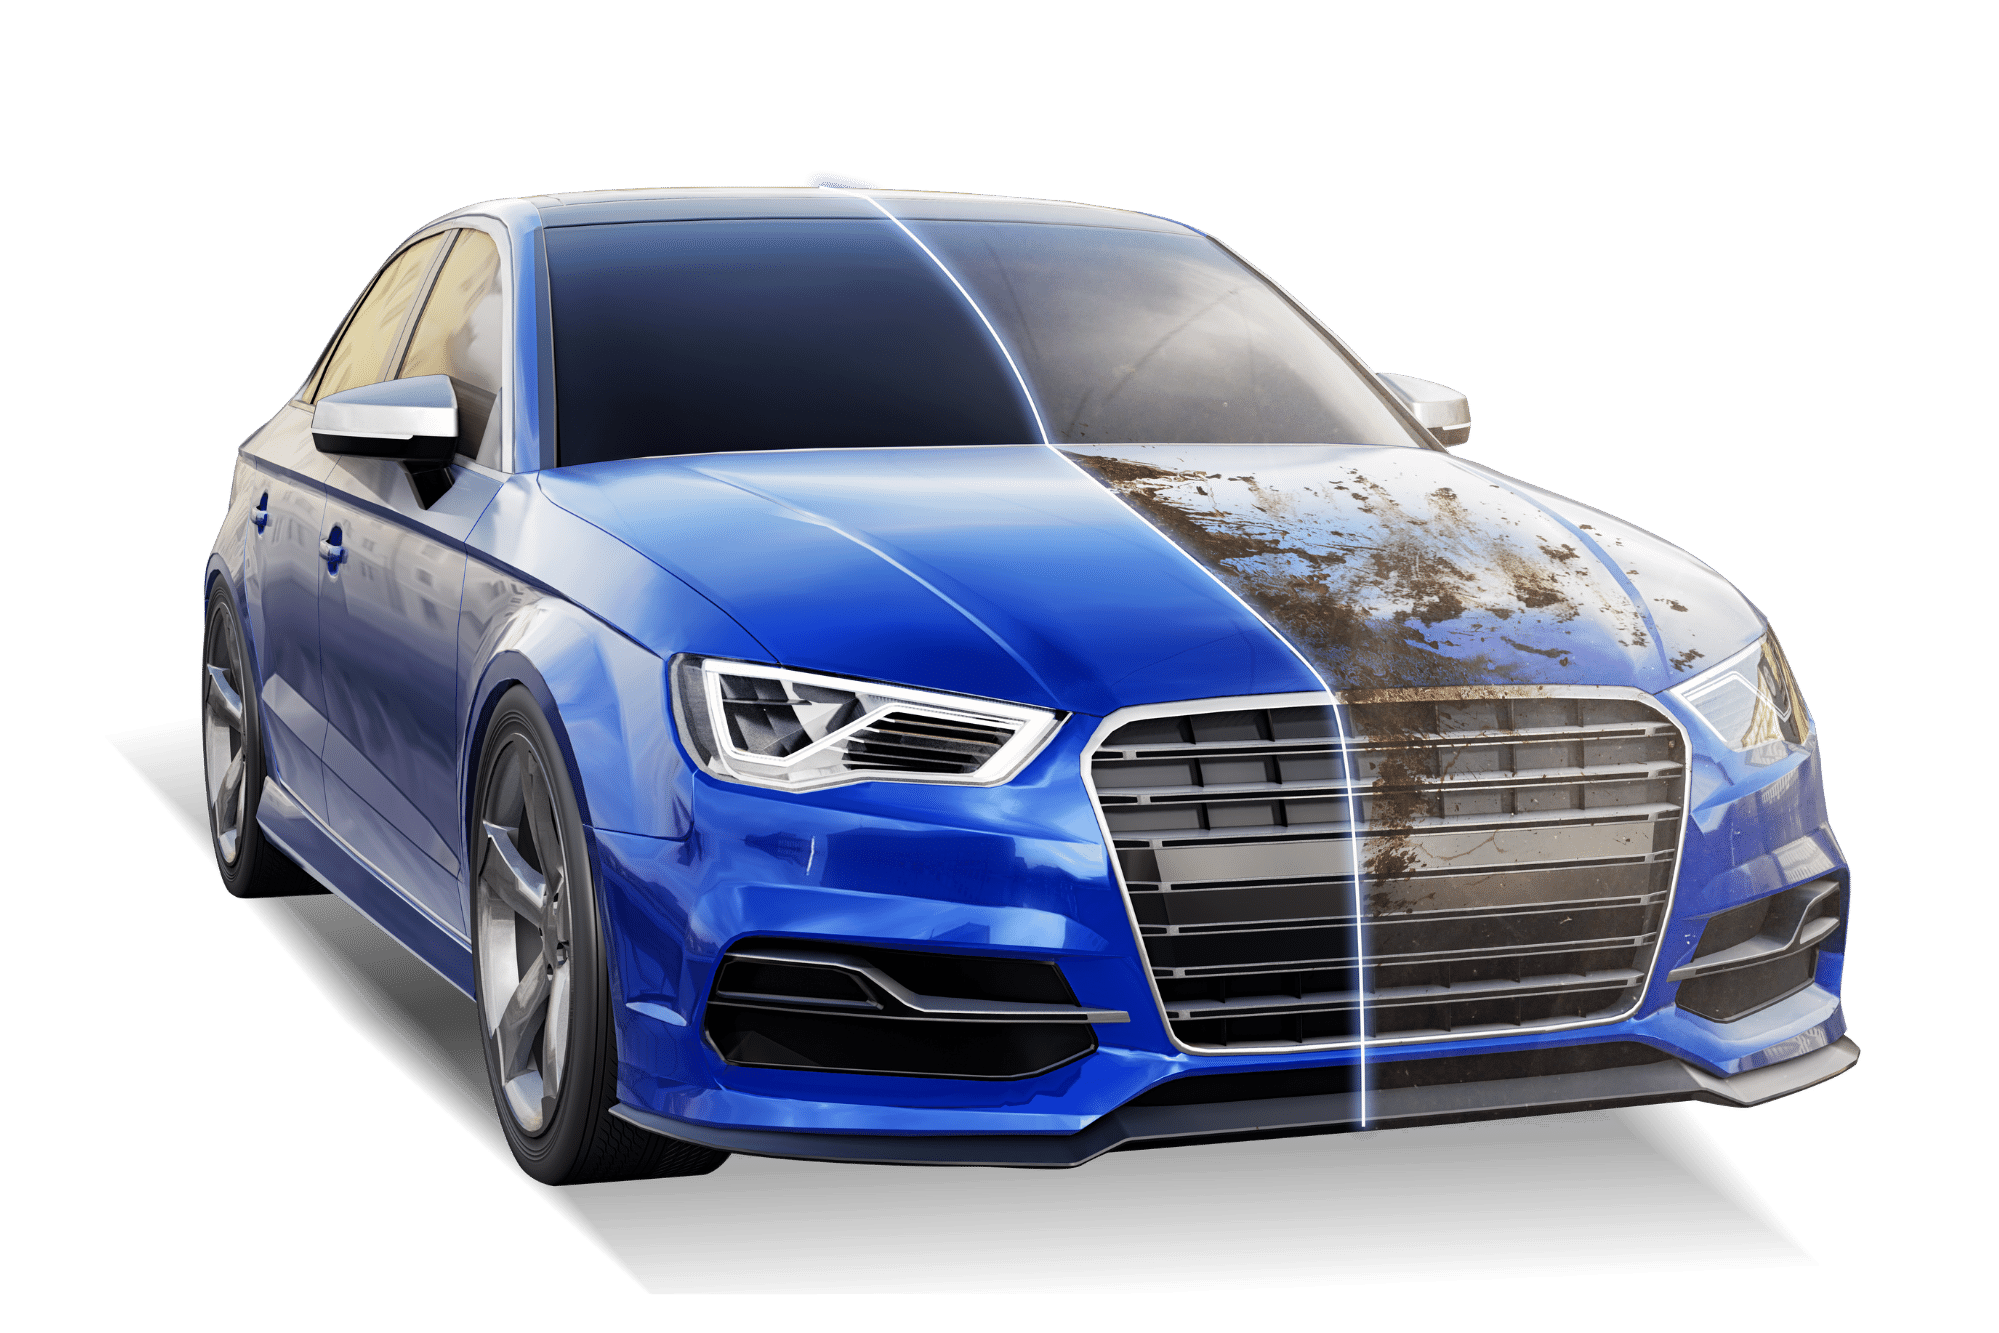 Glass ceramic coatings for cars in Chicago